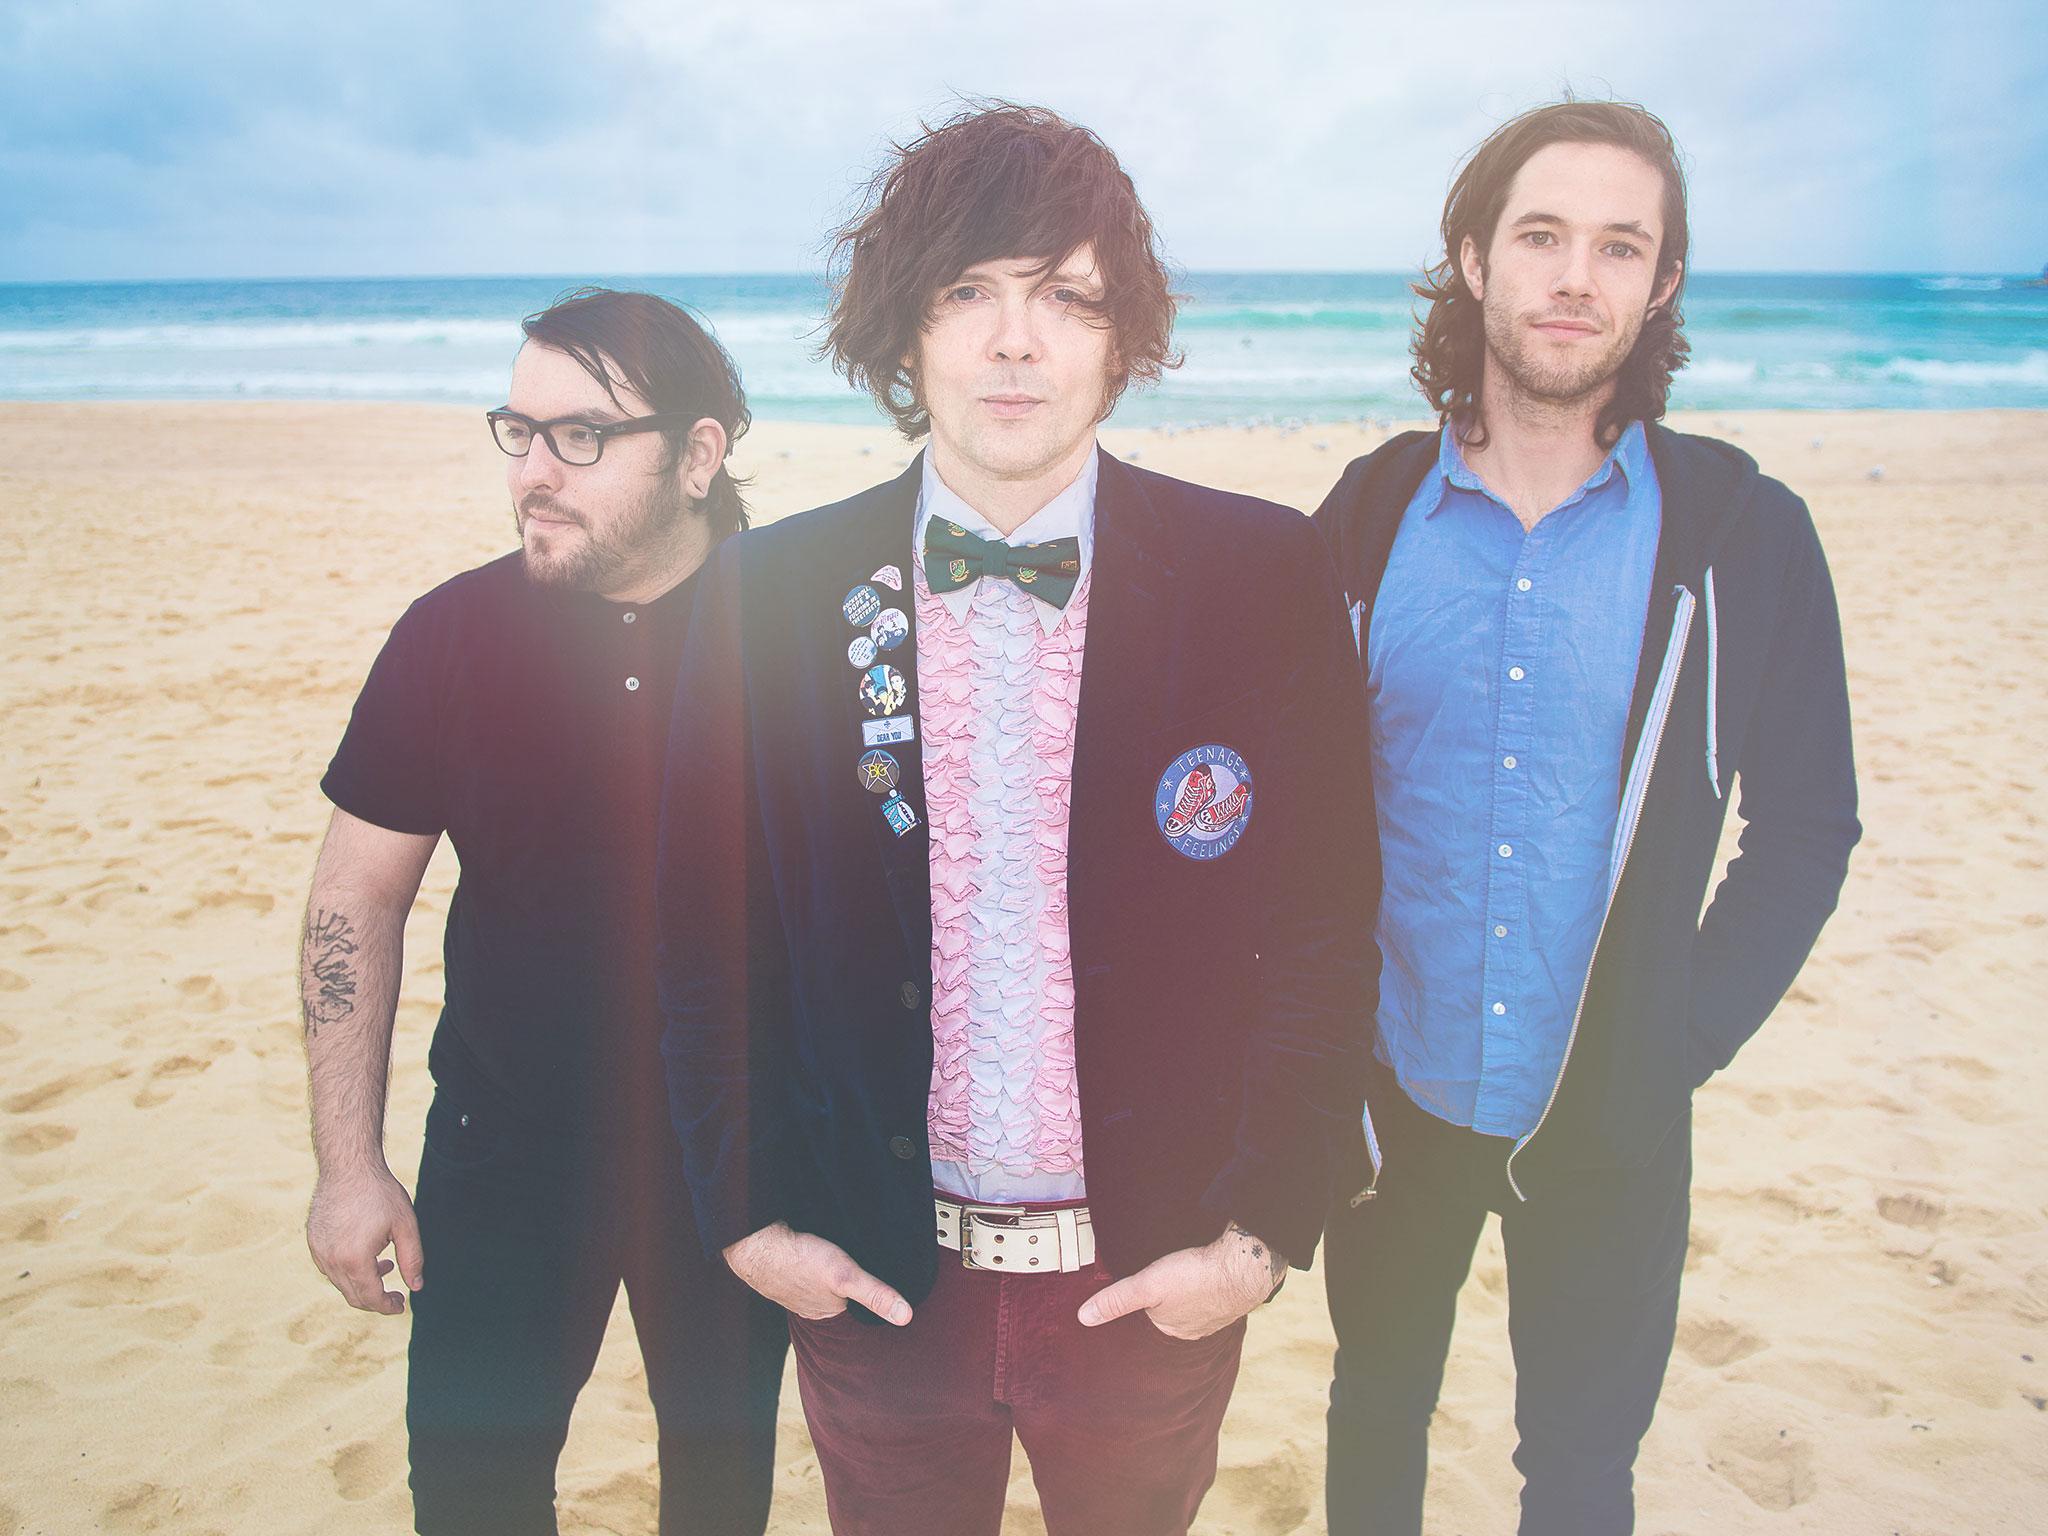 Beach Slang, from left to right, Ruben Gallego